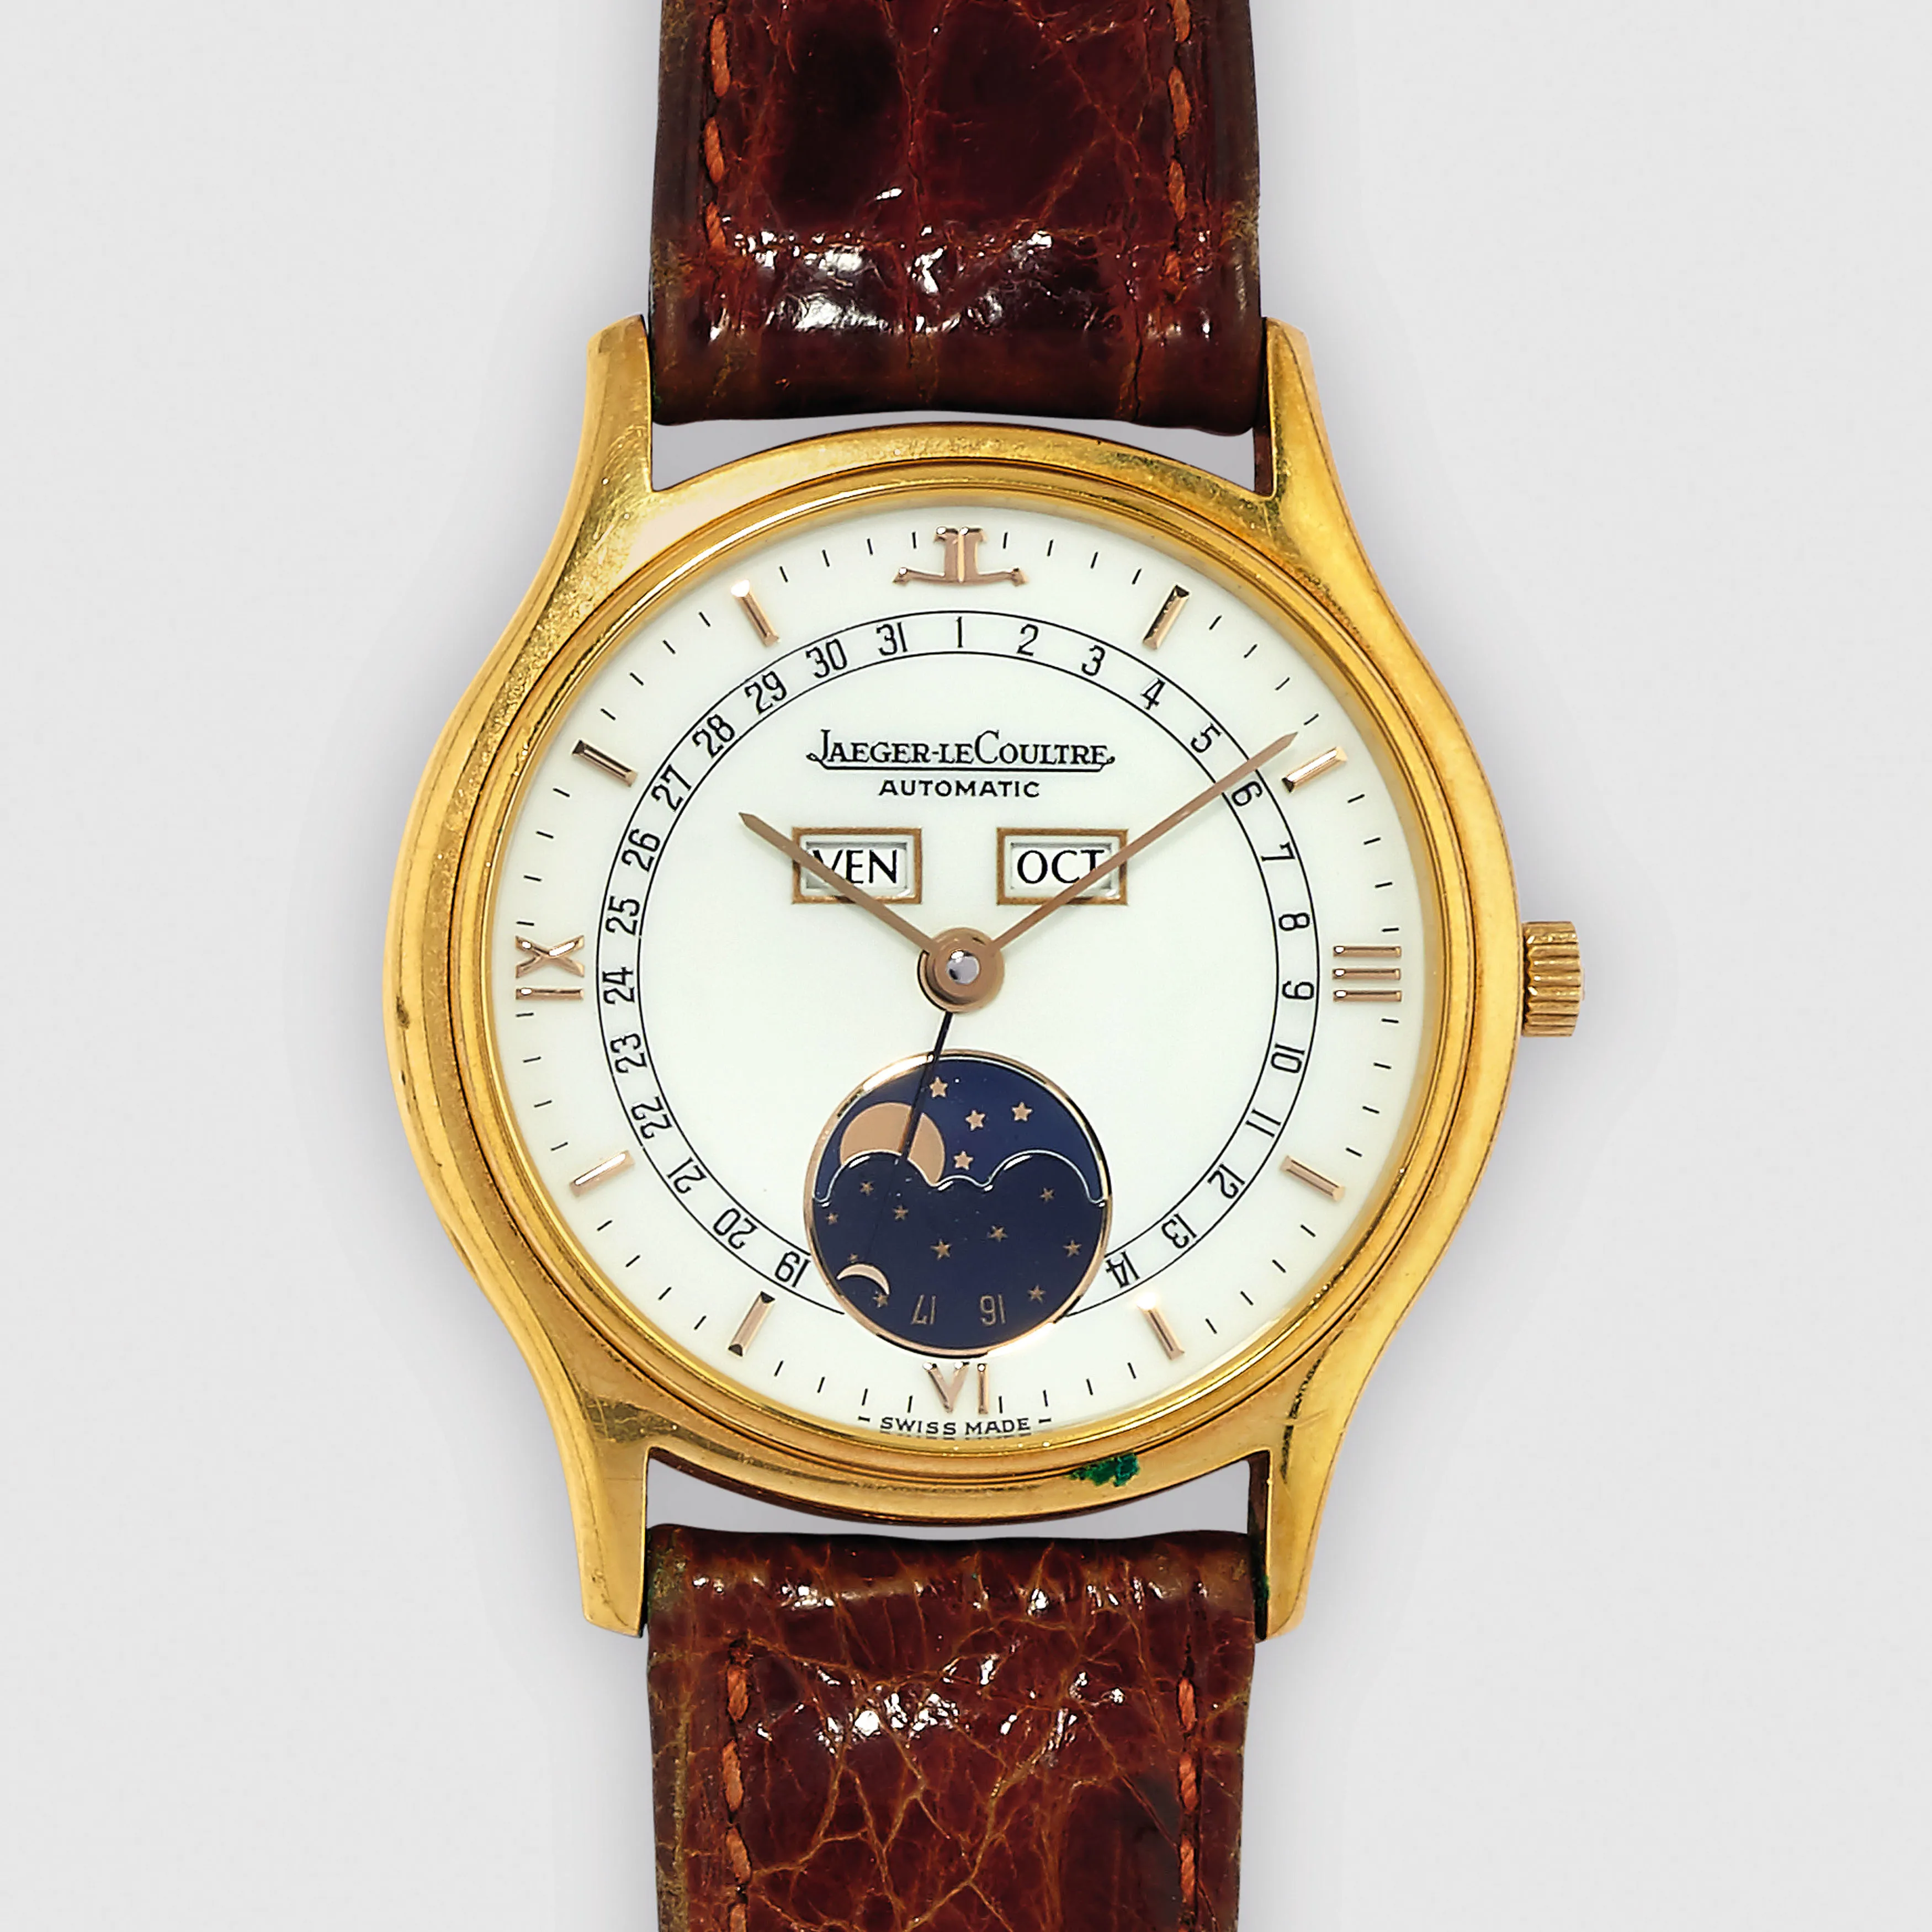 Jaeger-LeCoultre 141.119.1 33mm Yellow gold White